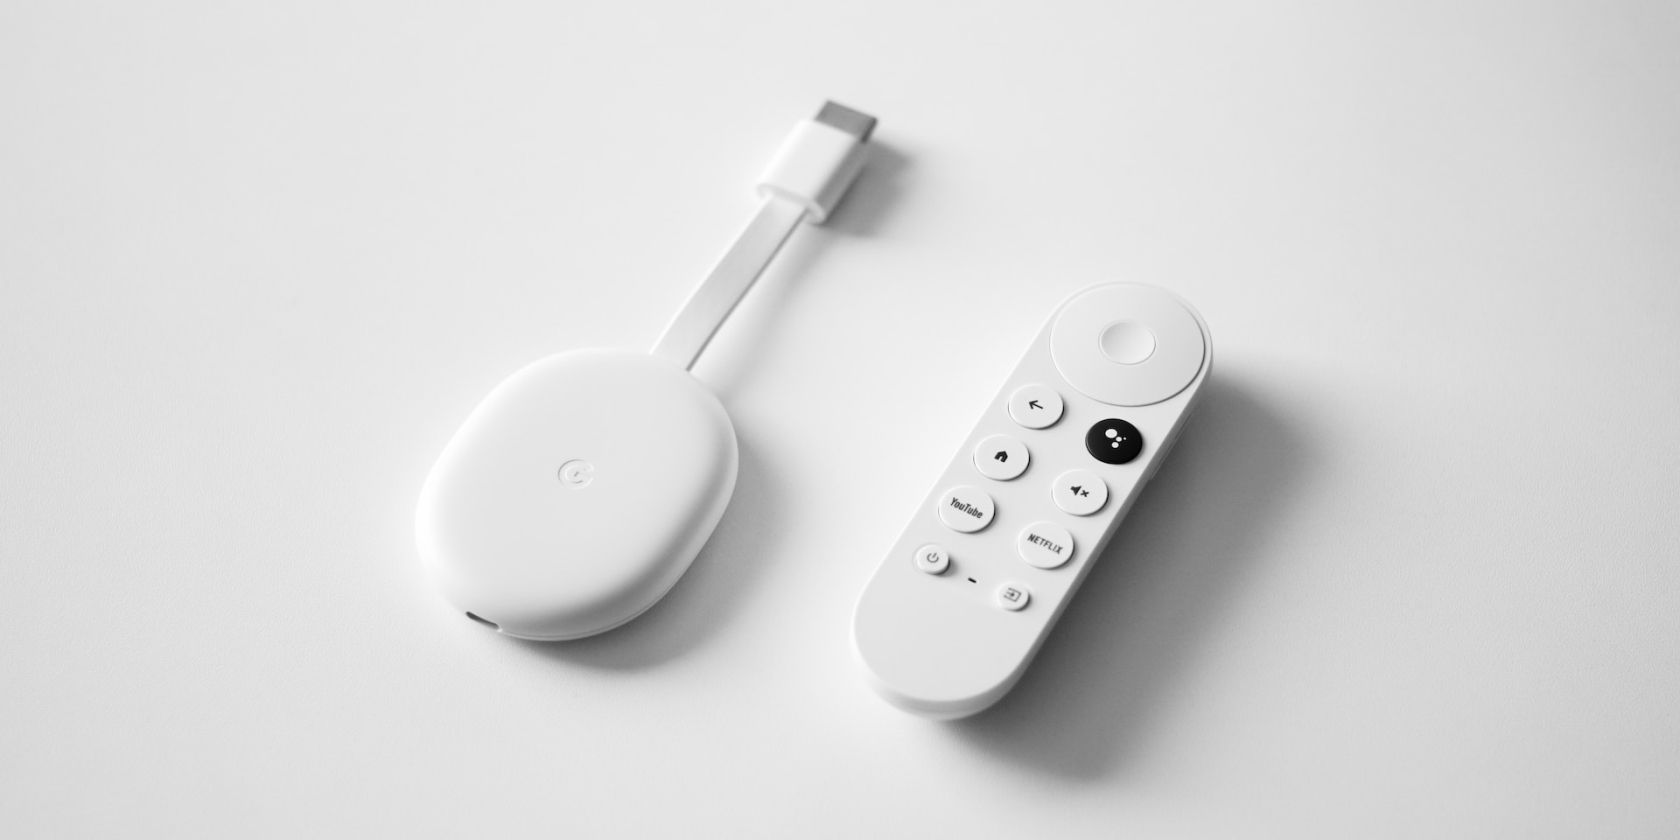 How to use Google Assistant and Chromecast to control your TV by